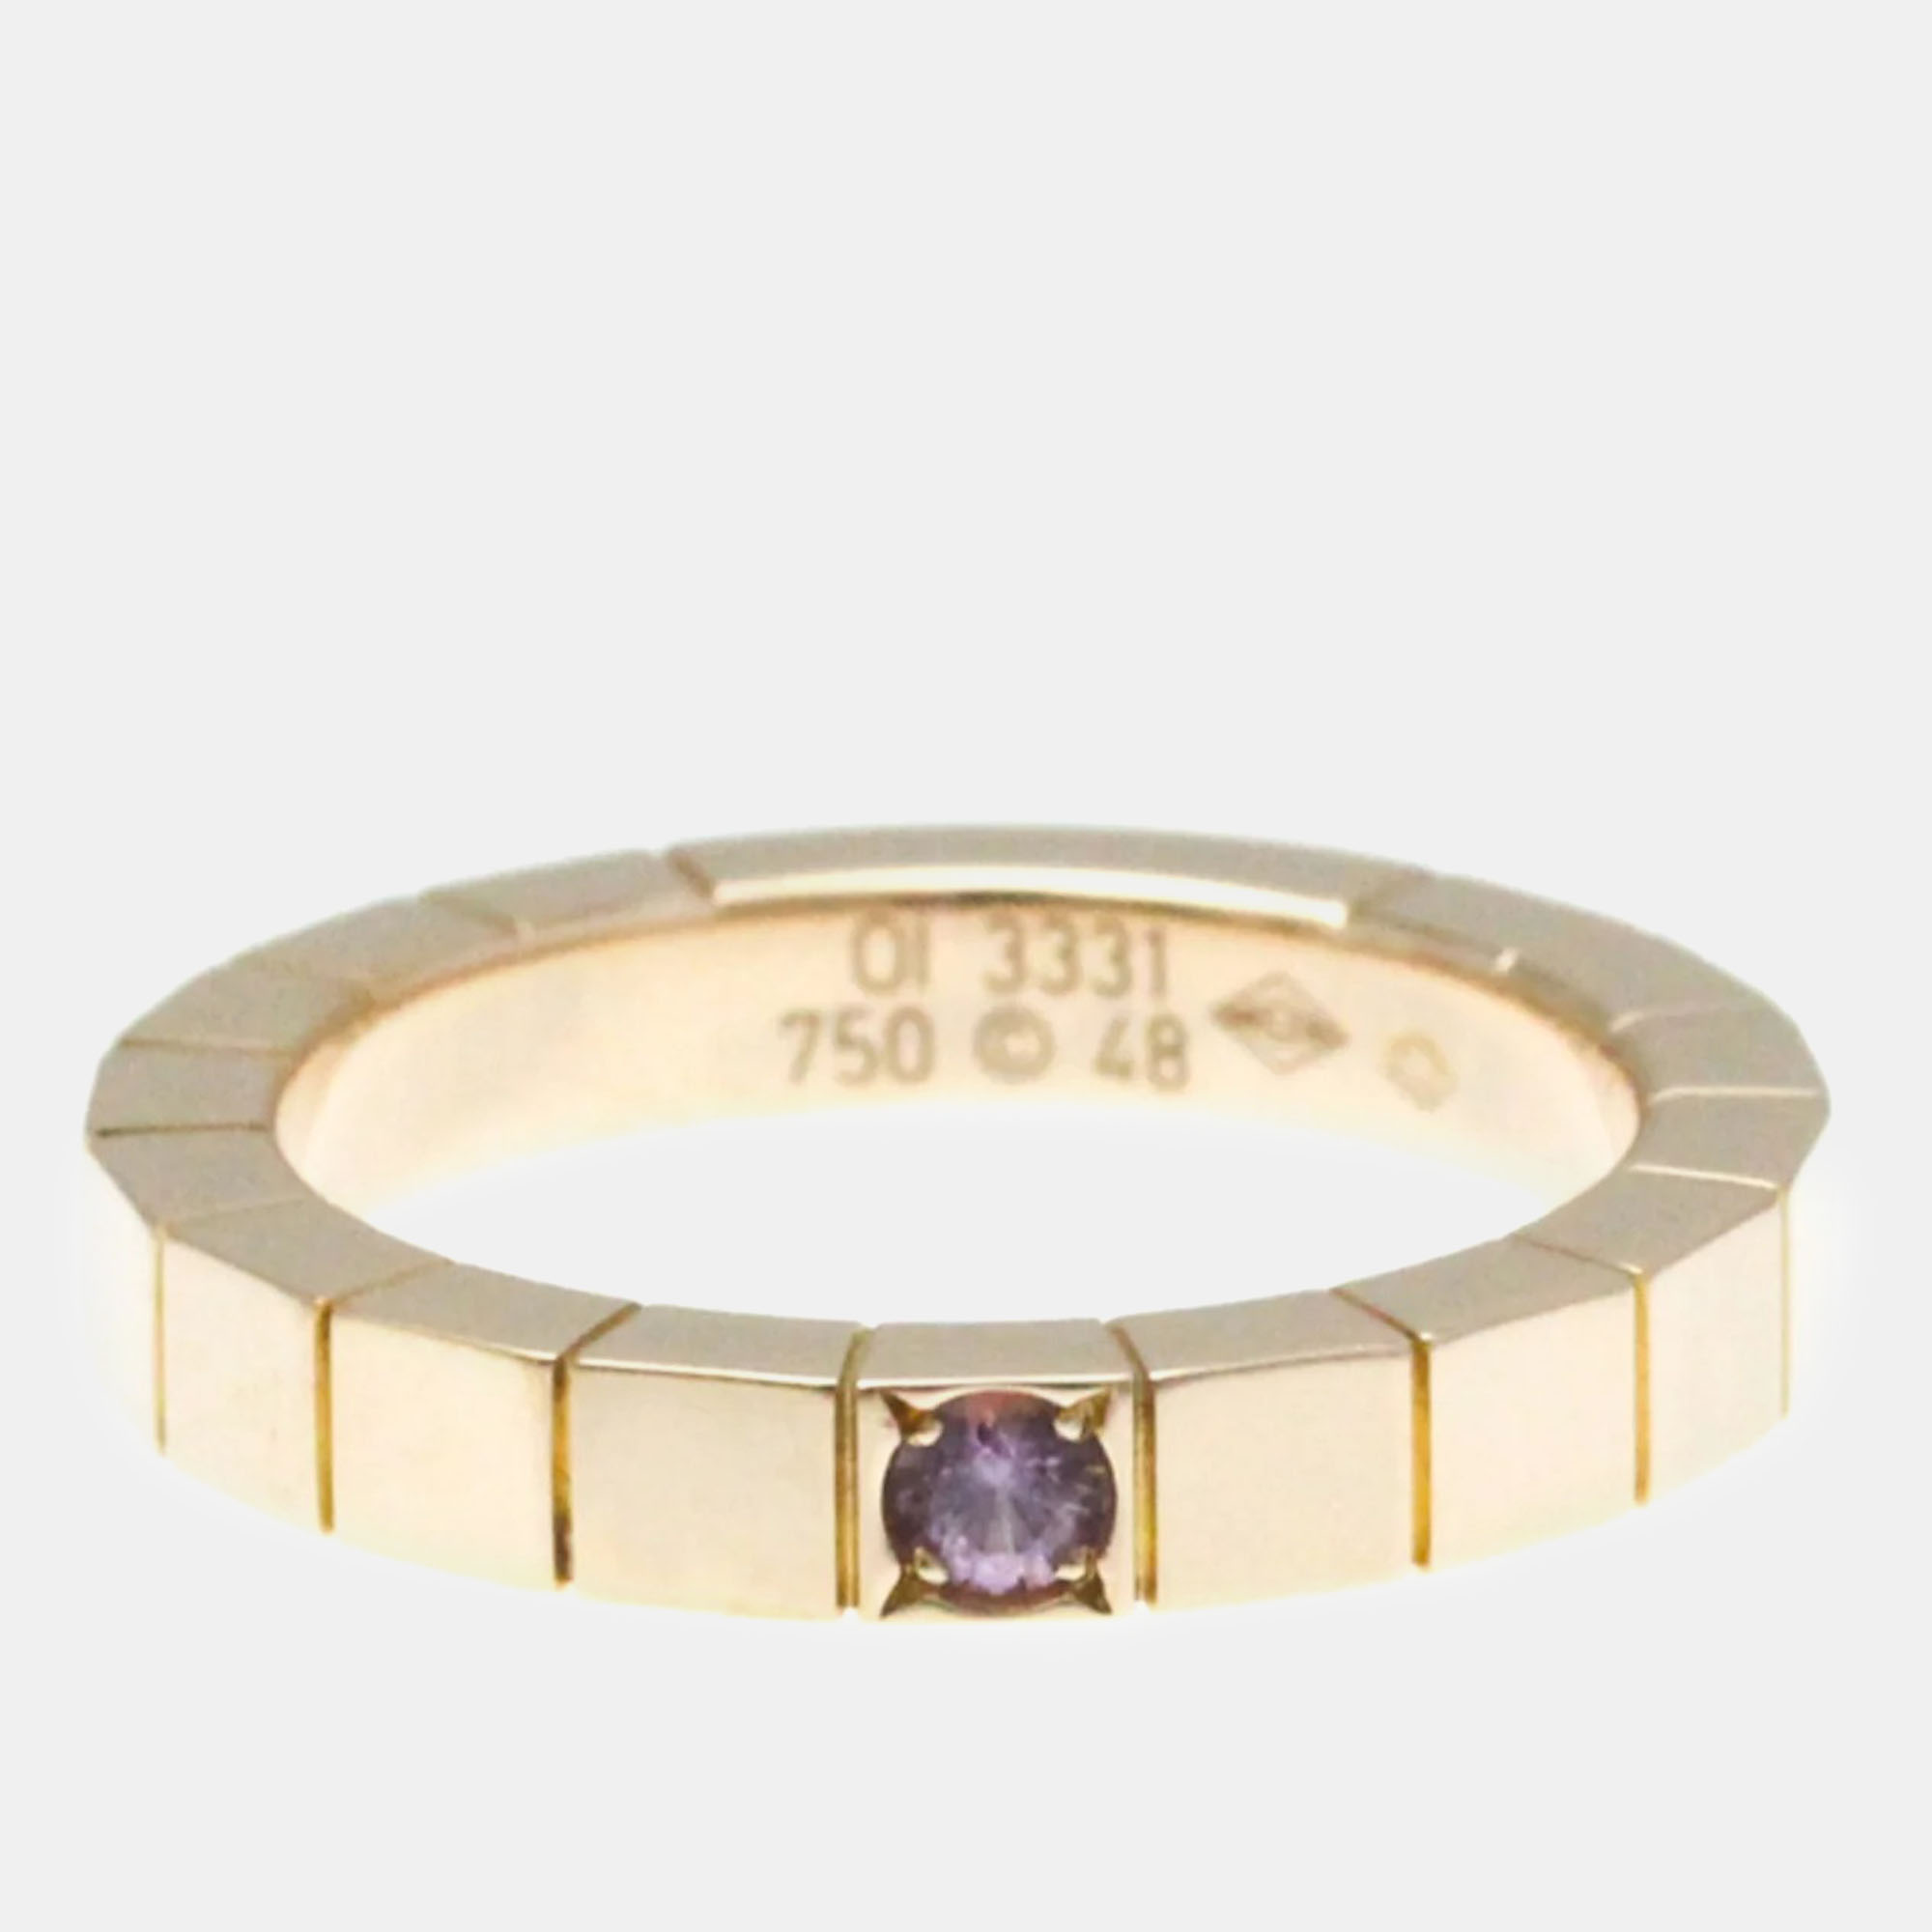 Cartier 18k rose gold and sapphire lanieres band ring eu 48